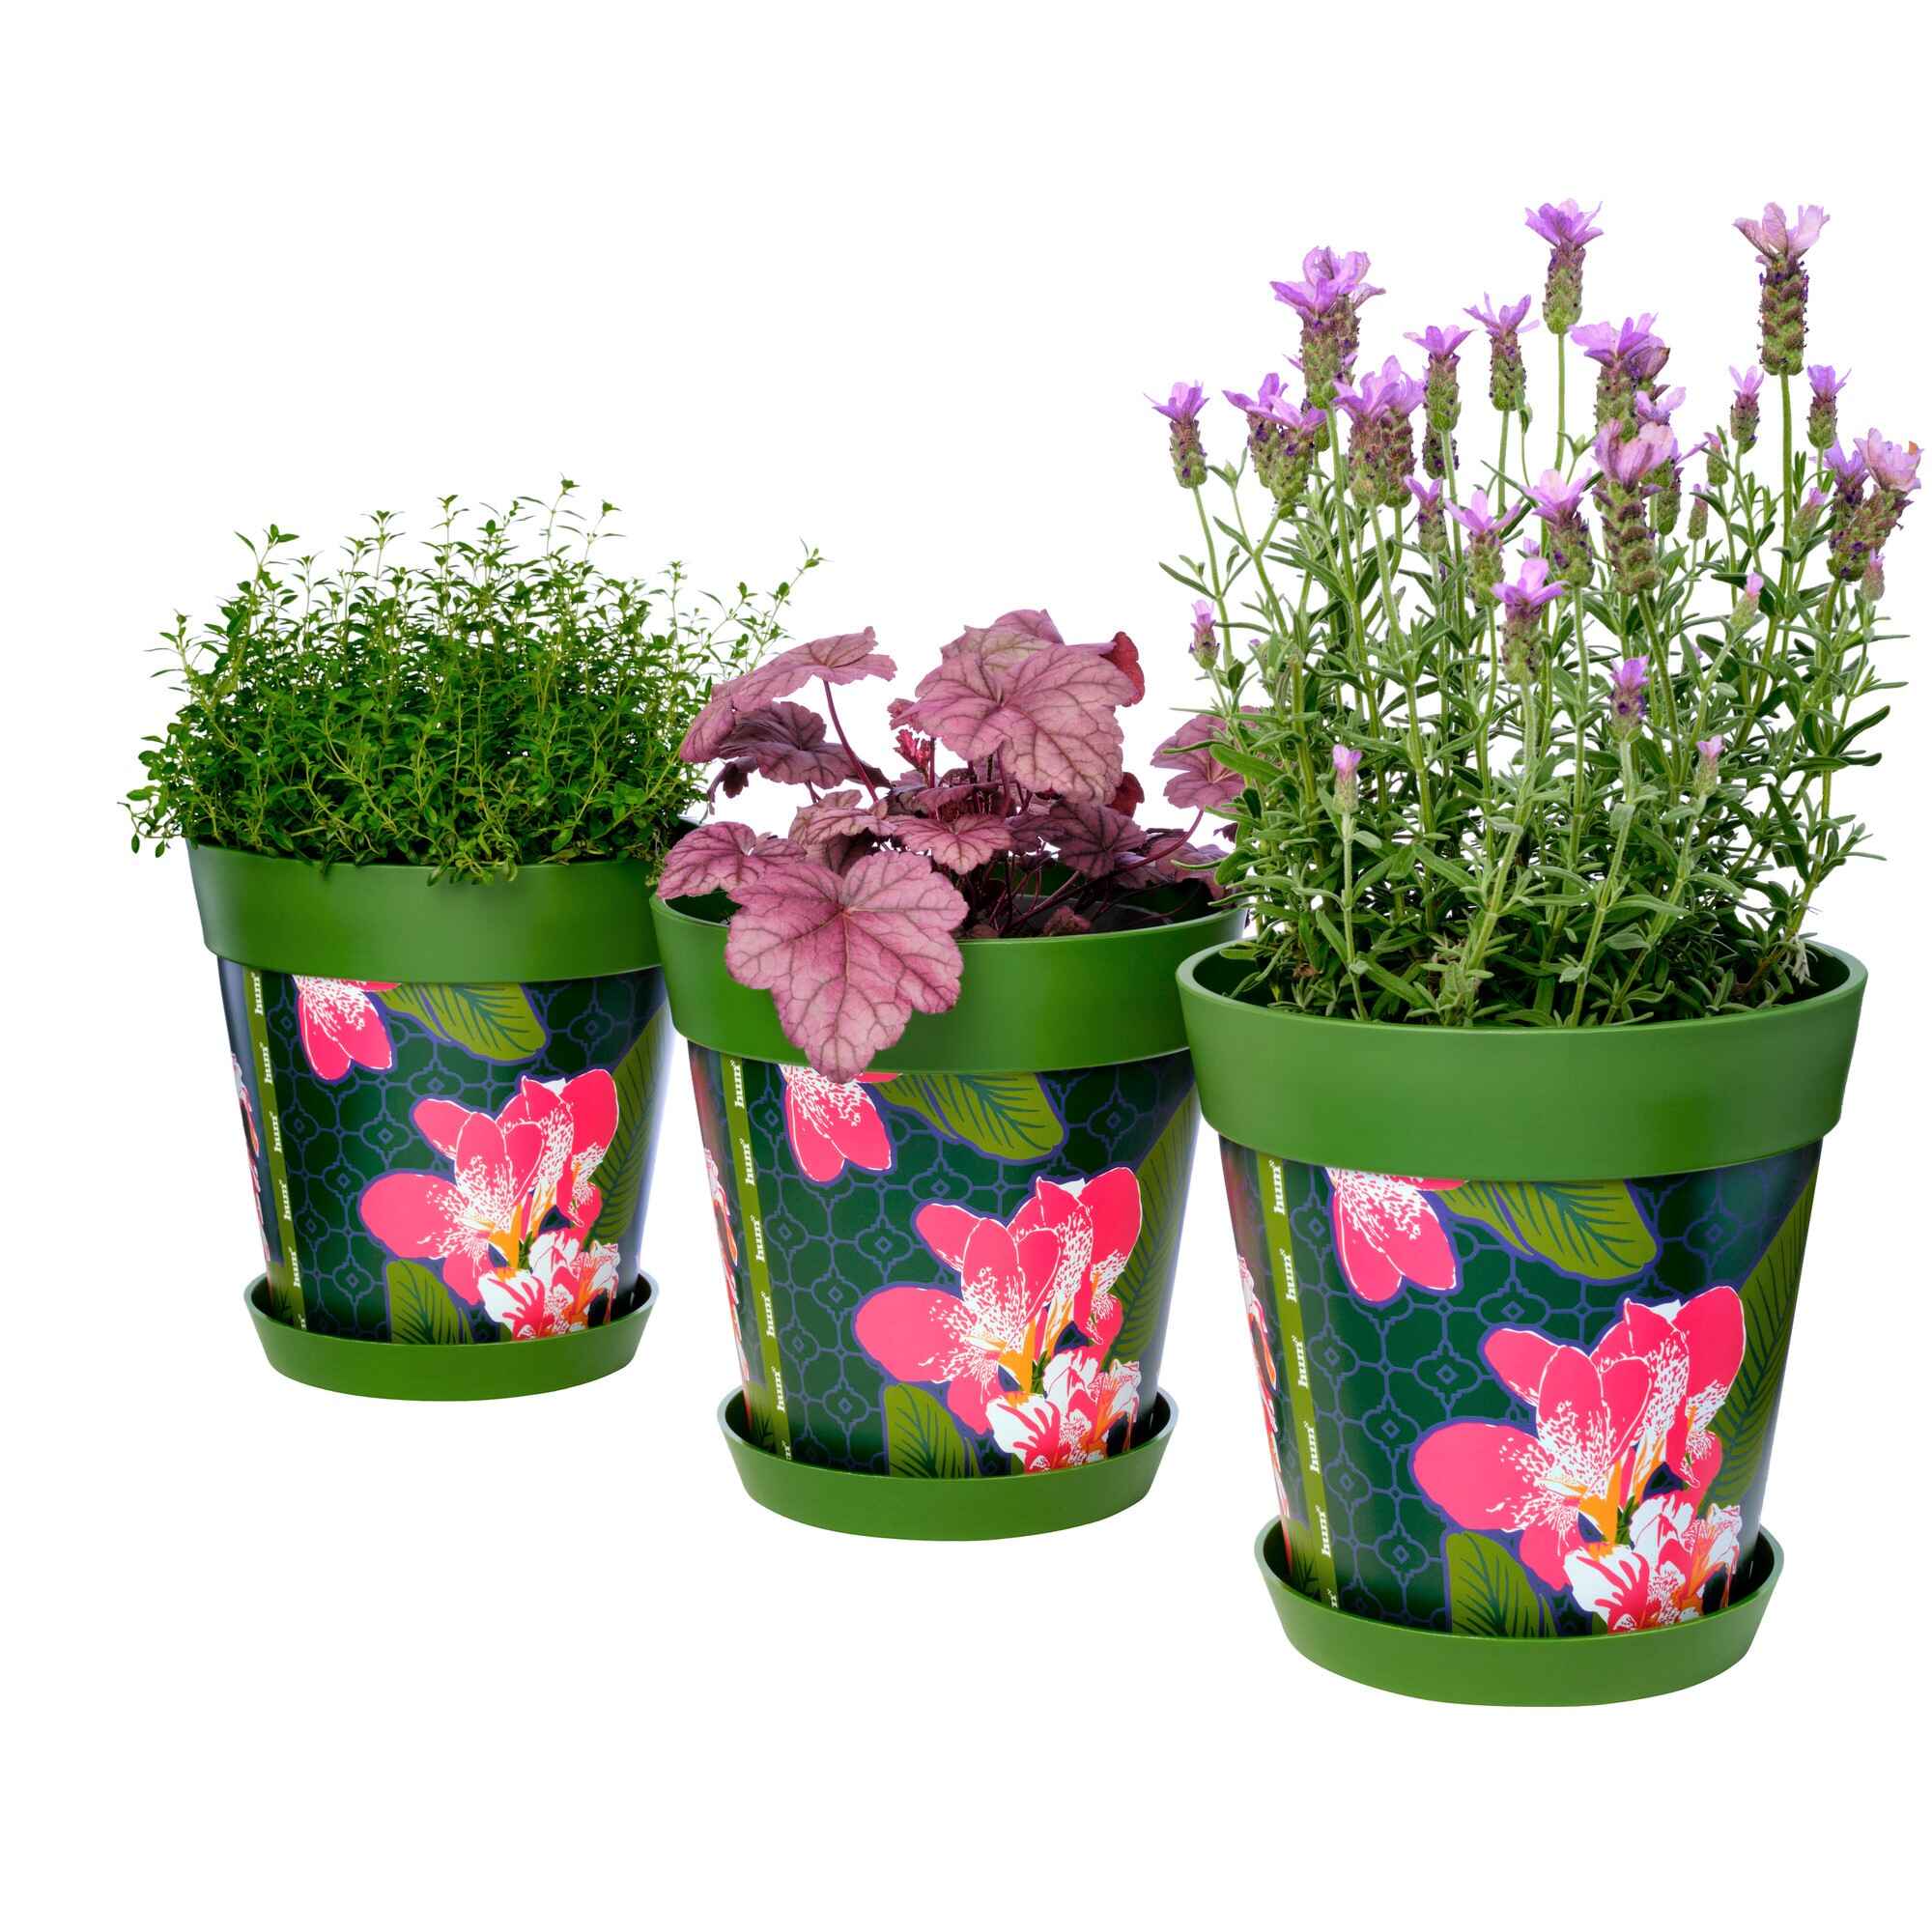 Picture of 3 Planted Medium 22cm Green Tropical and Floral Pattern Indoor/Outdoor Flower Pot and Saucers